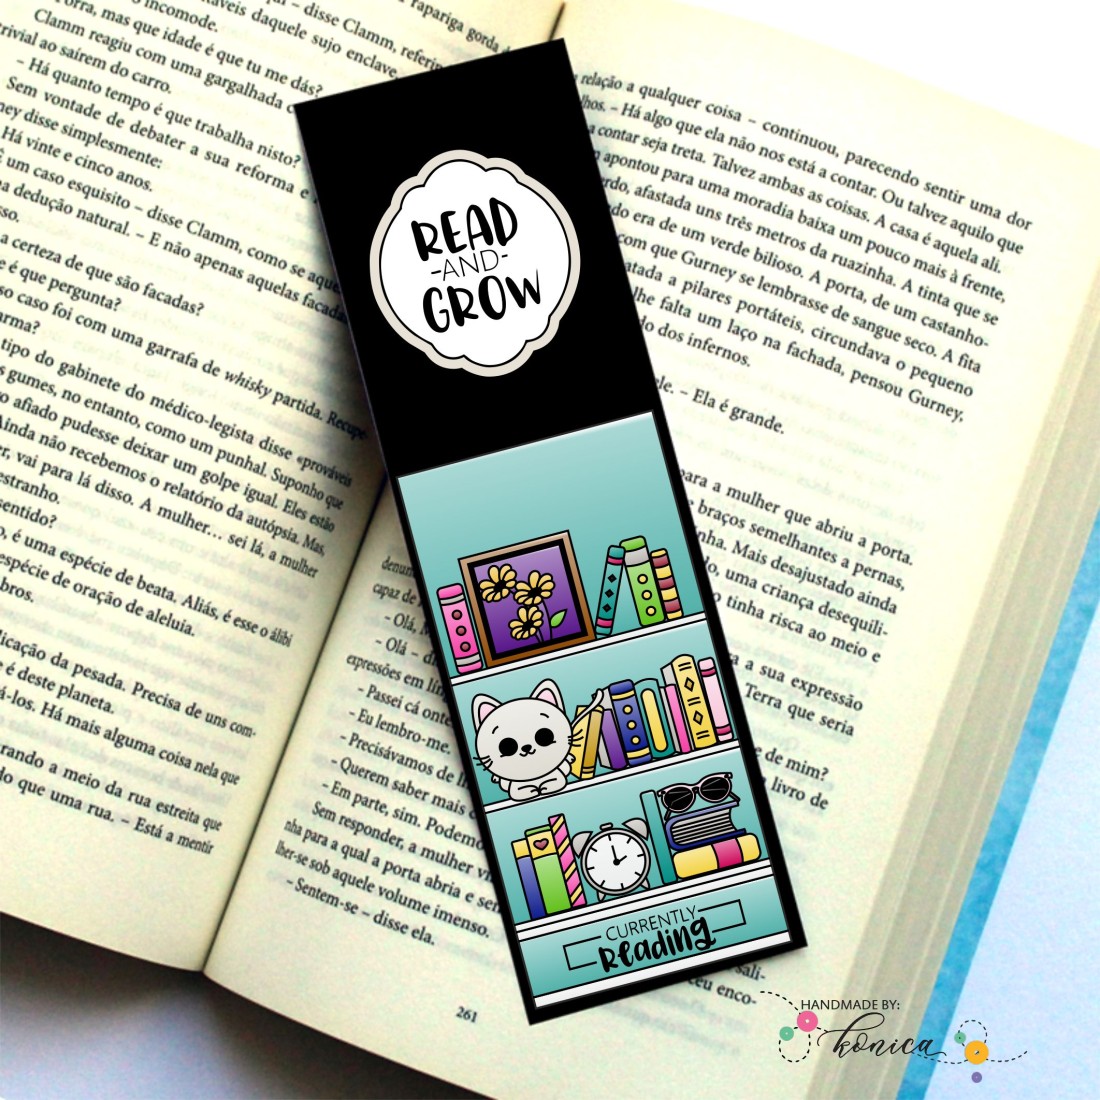 Craftyscrappers Stamps- CREATE-A-BOOKMARK